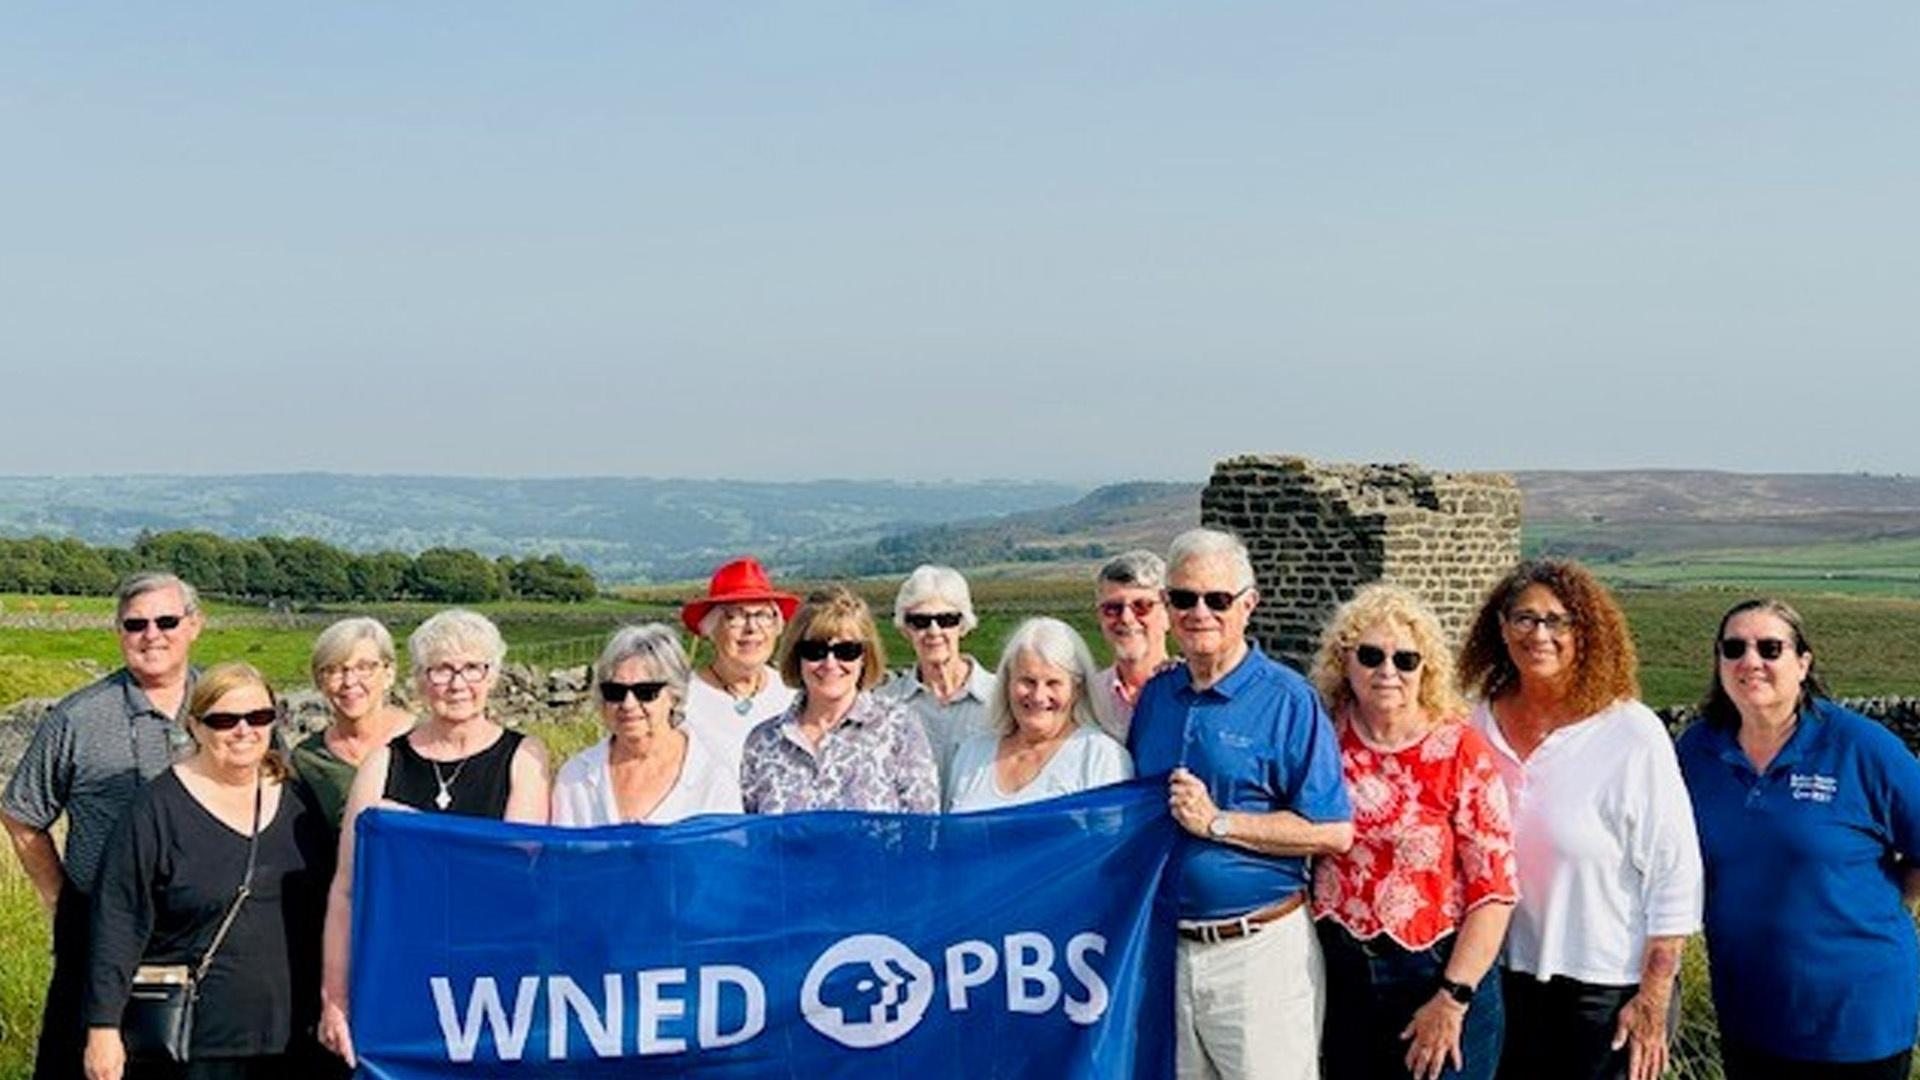 group holding WNED PBS flag with the Yorkshire Dales in the background while on the All Creatures Great an Small tour of England